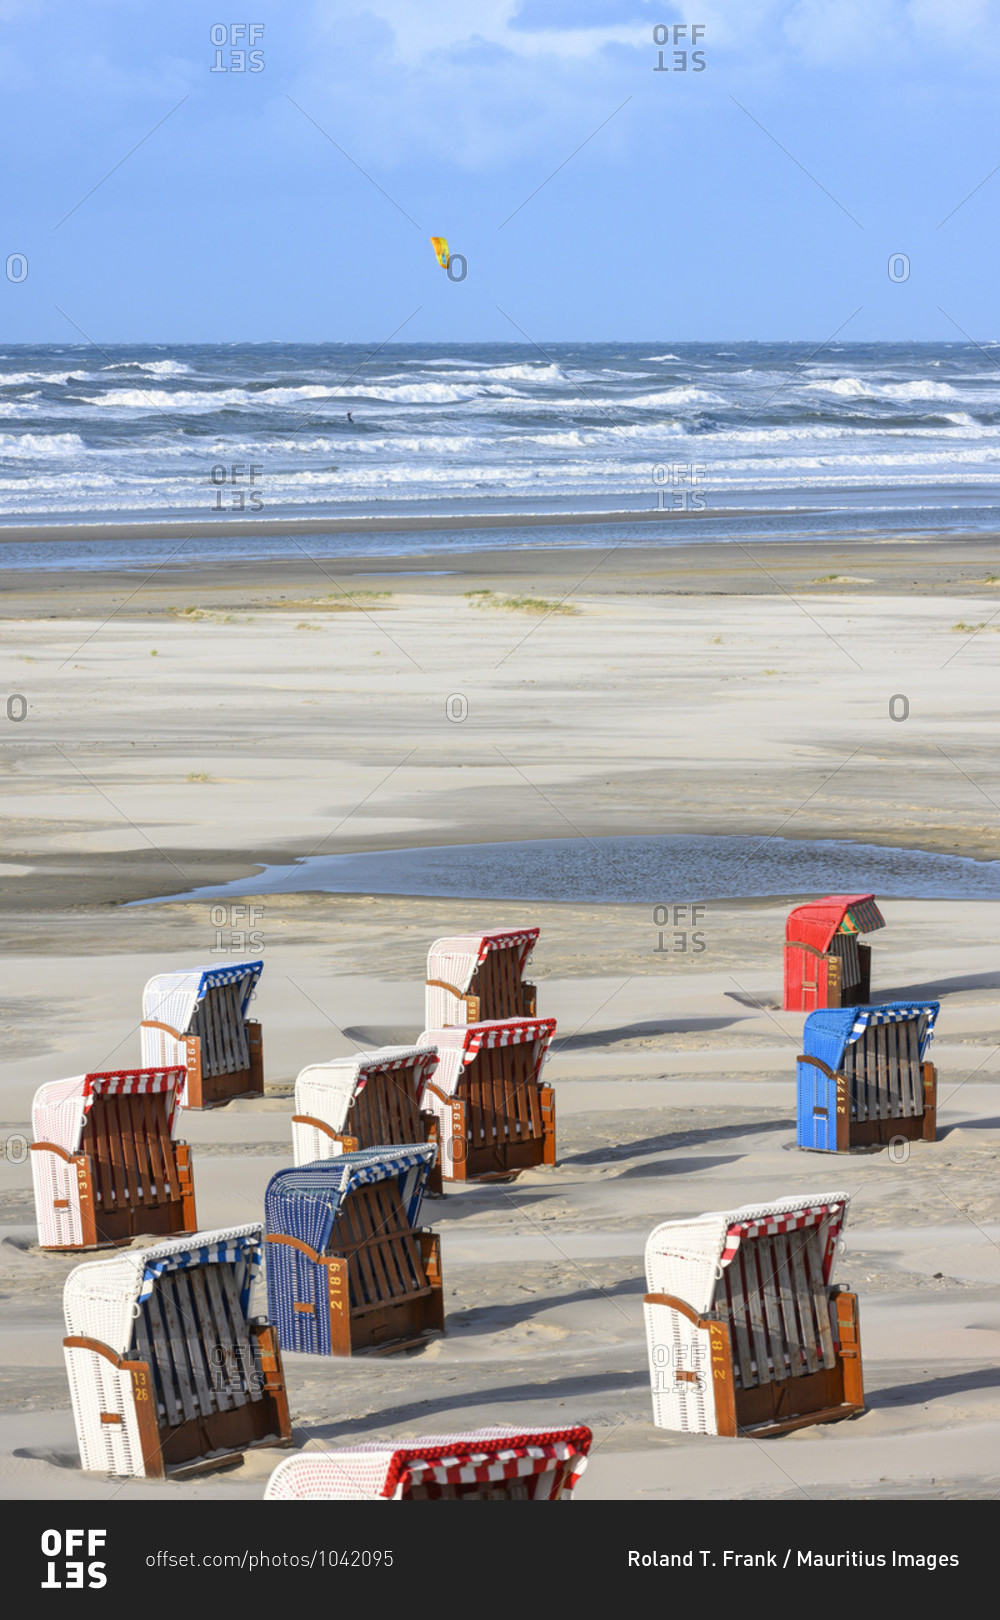 Germany, Lower Saxony, East Frisia, Juist, the beach with beach chairs.